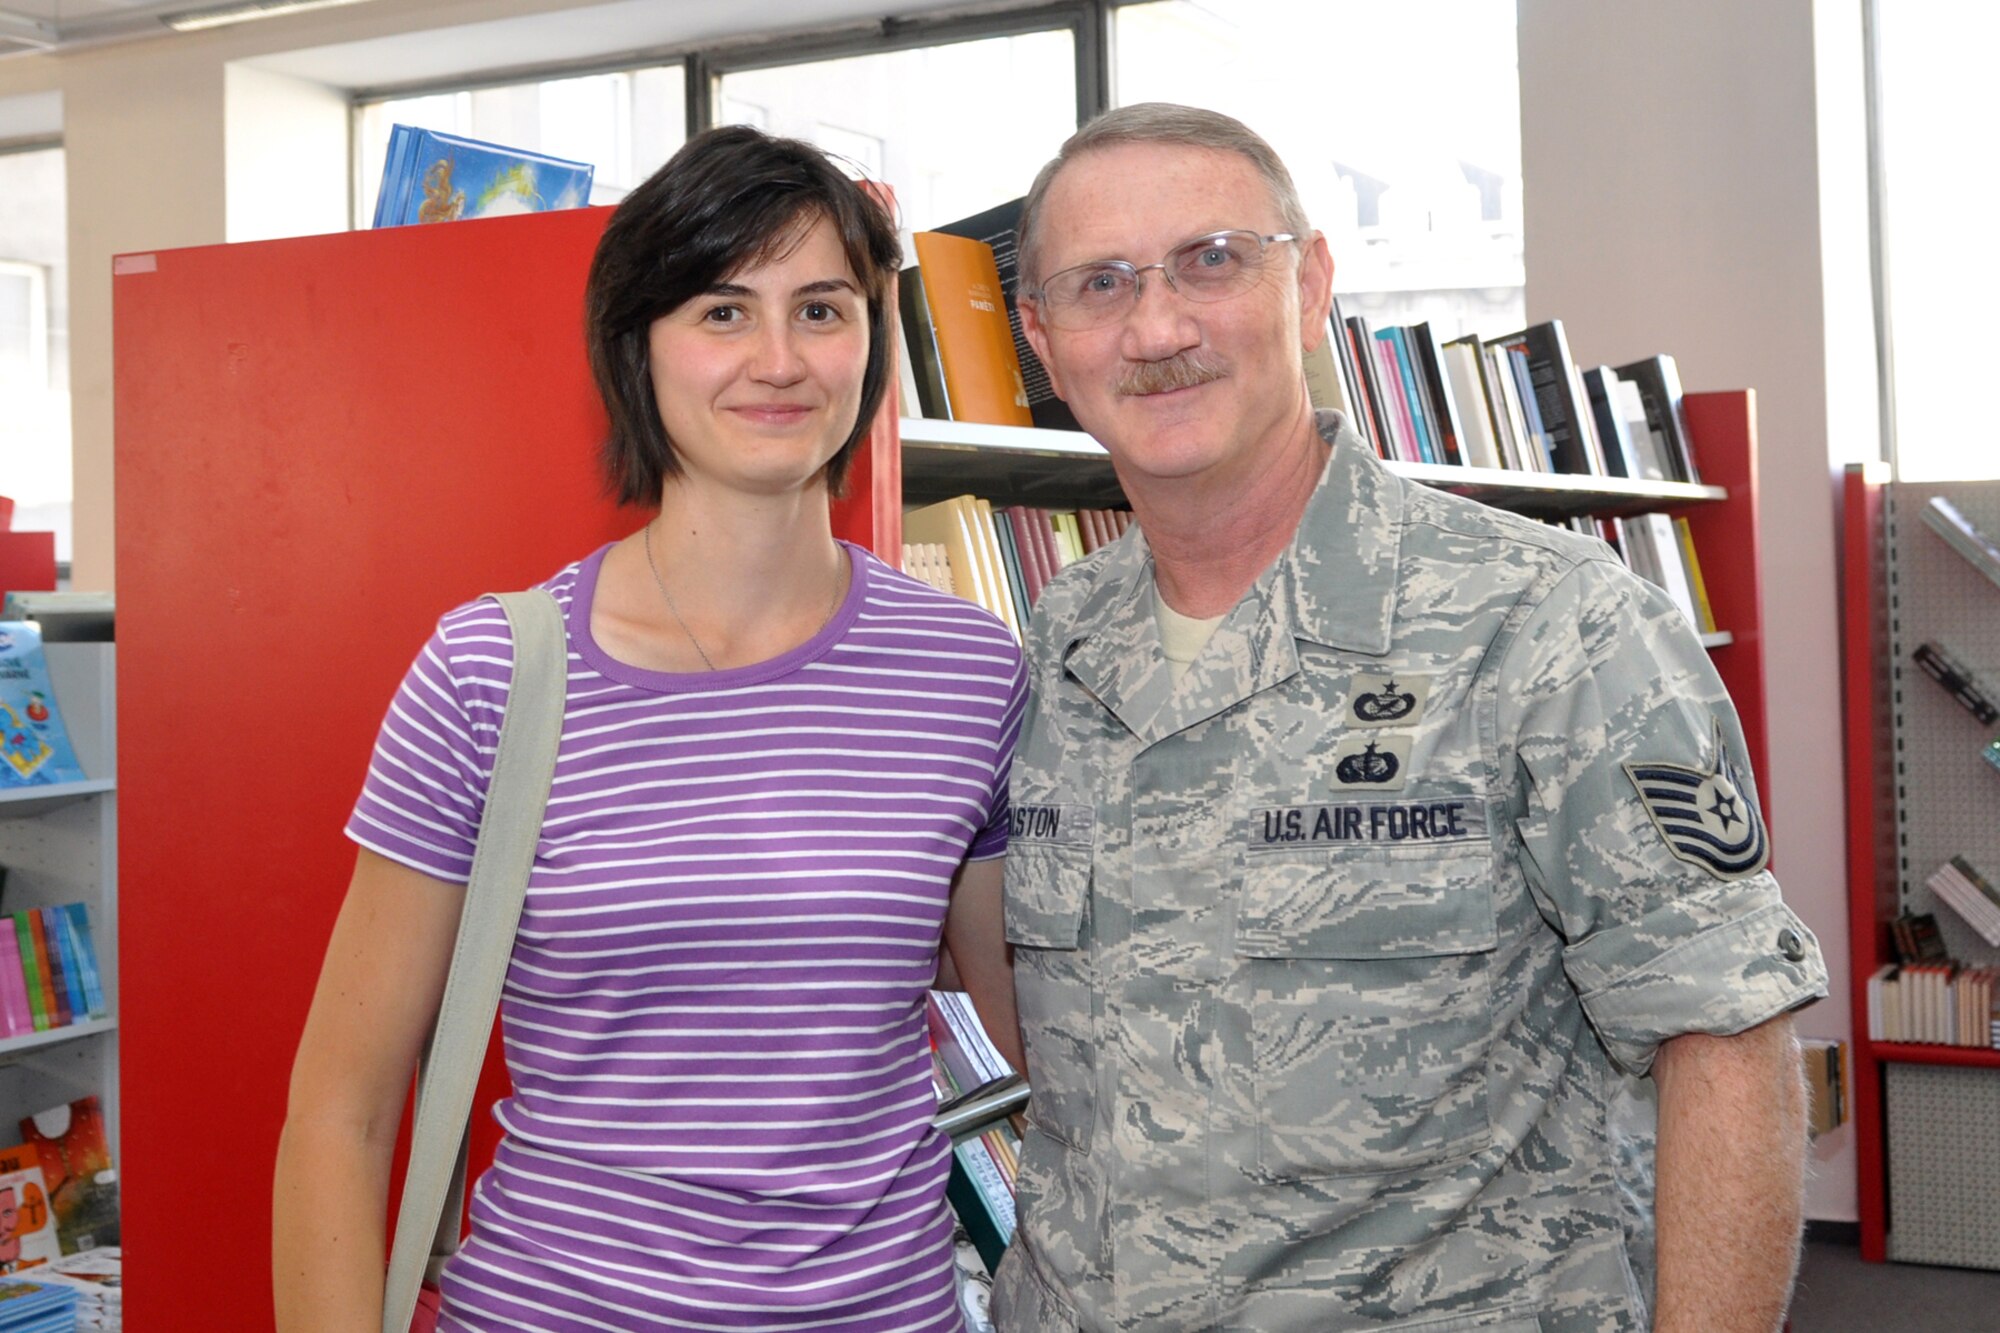 U.S. Air Force Reserve Tech Sgt. Jeff Walston and Eva Klimentova meet for the first time at a book store Sept. 23, 2011, in Ostrava, Czech Republic. Walston and Klimentova corresponded by email for nearly a year before Walston got the opportunity to travel to the Czech Republic during a visit of a B-52 Stratofortress to NATO Days, the biggest security show in Europe. (Courtesy photo)